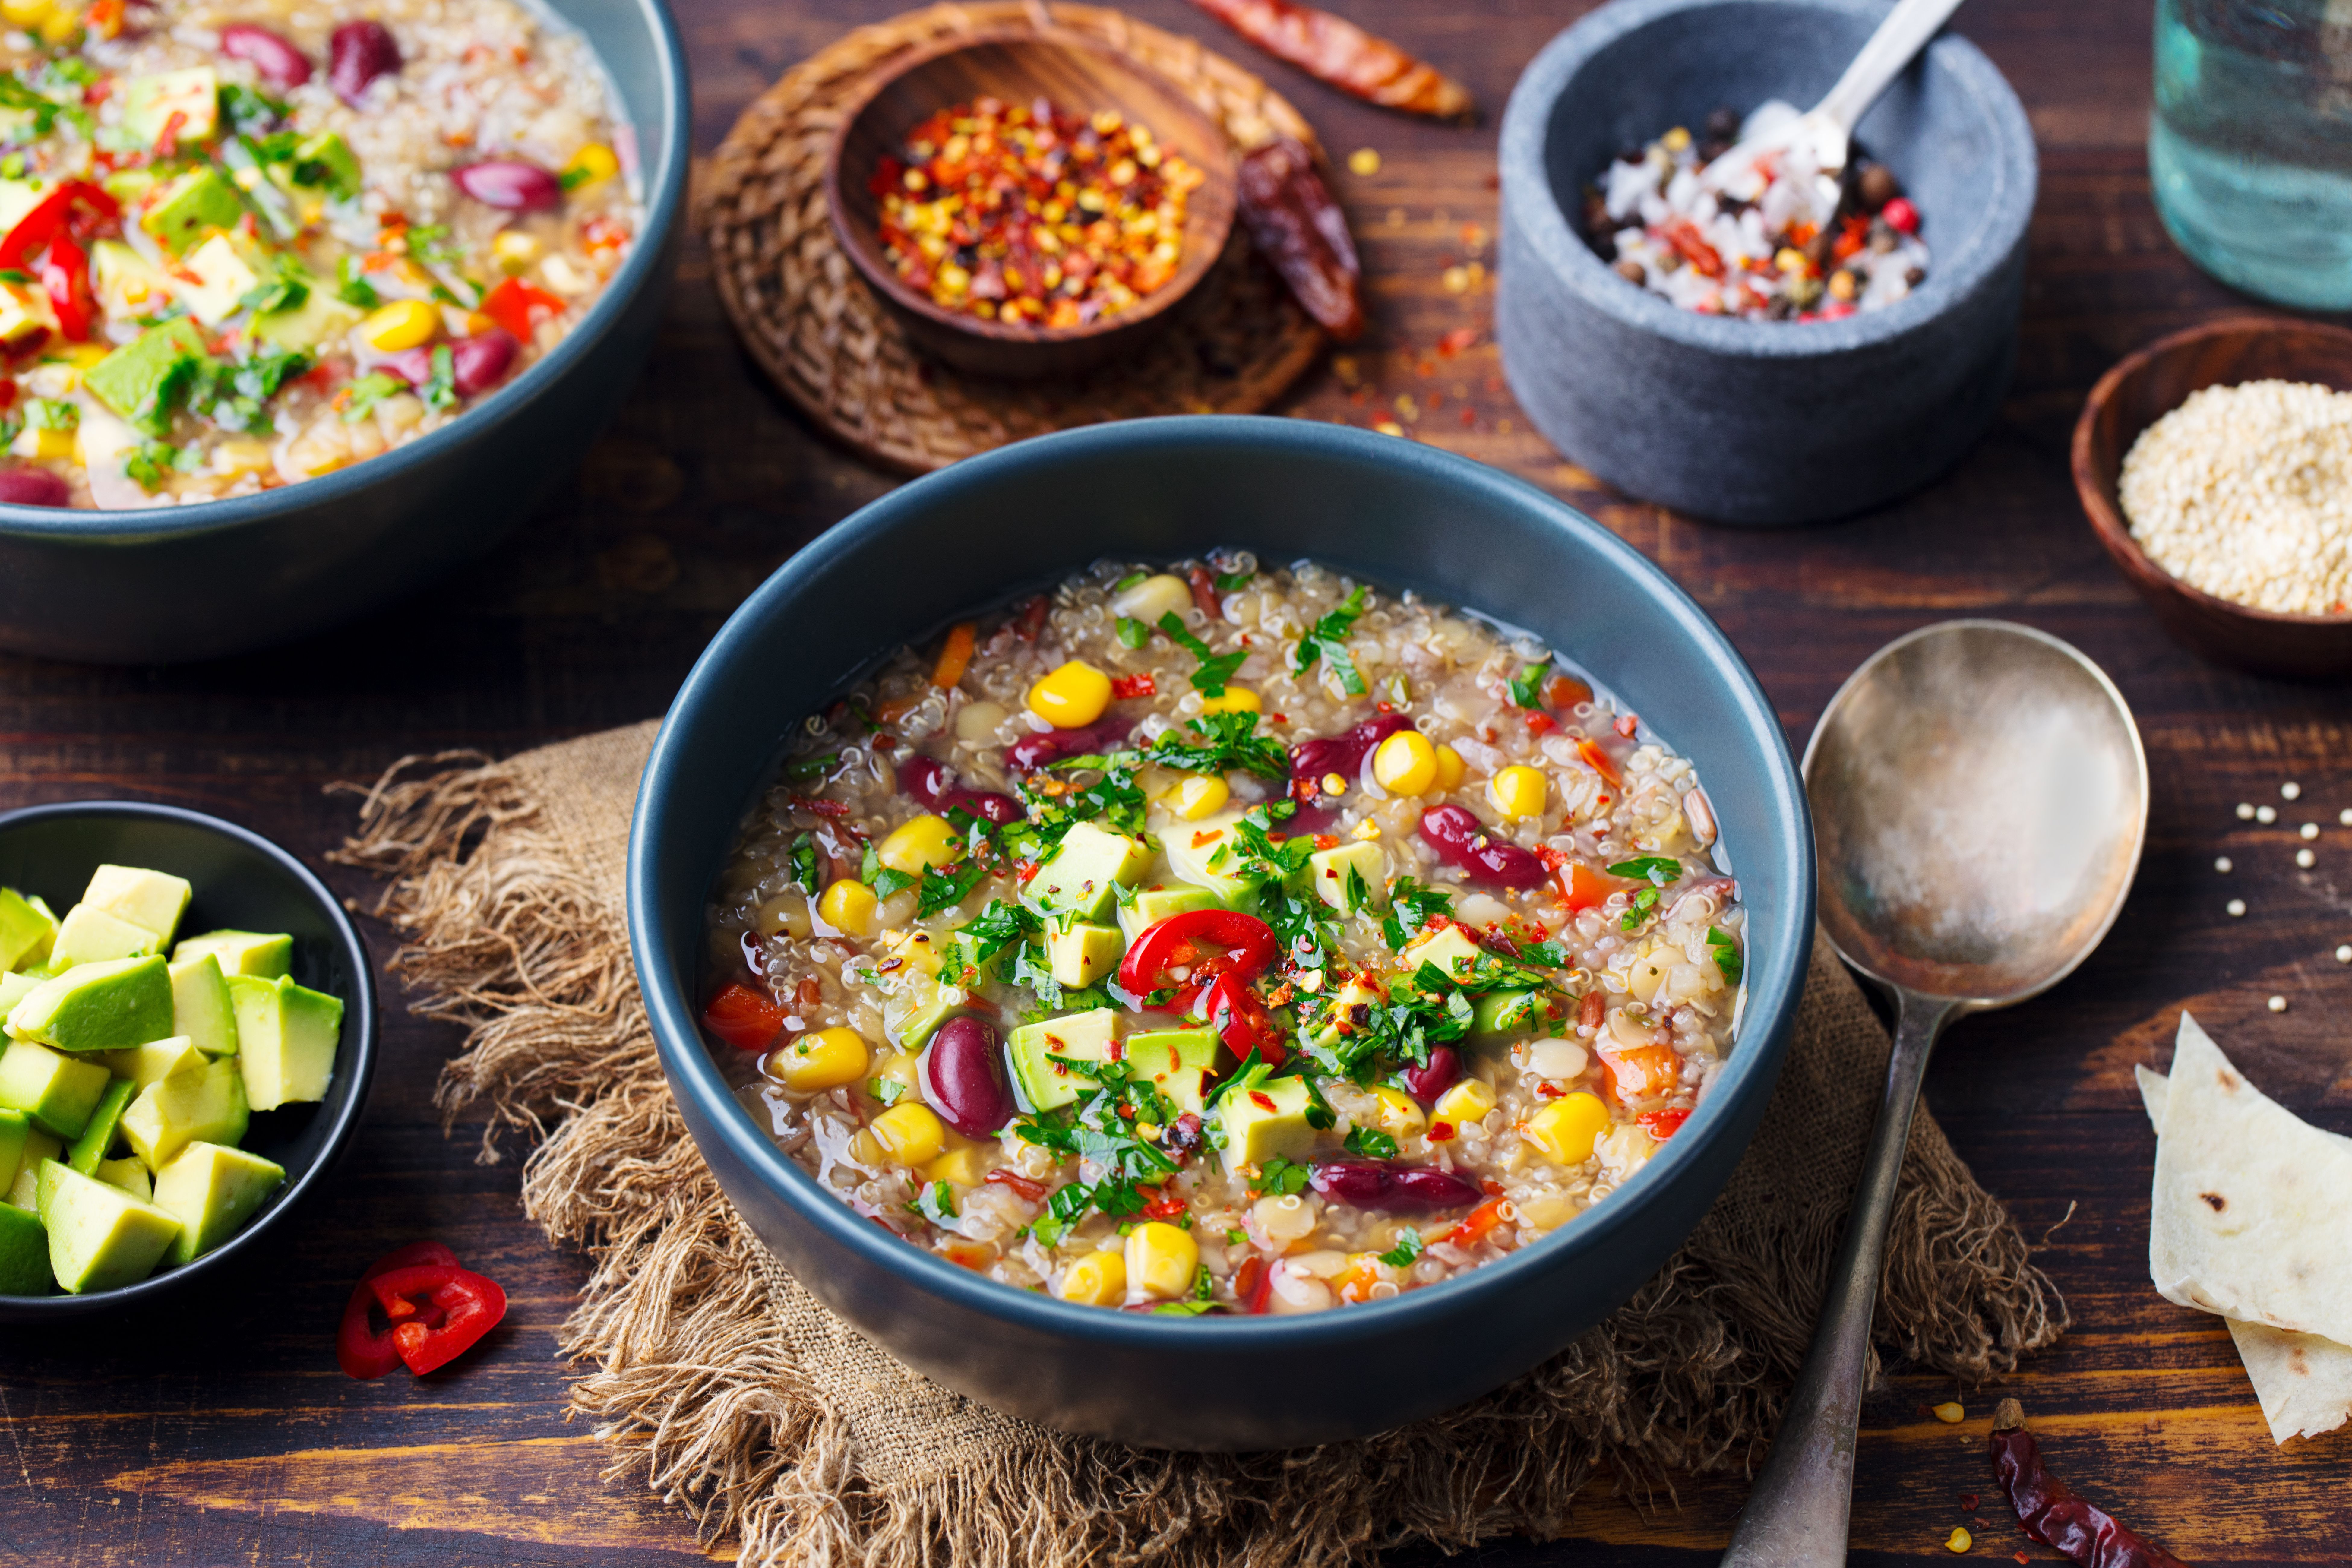 A bowl of colorful soup with quinoa, red beans, corn, avocado, and green garnish.